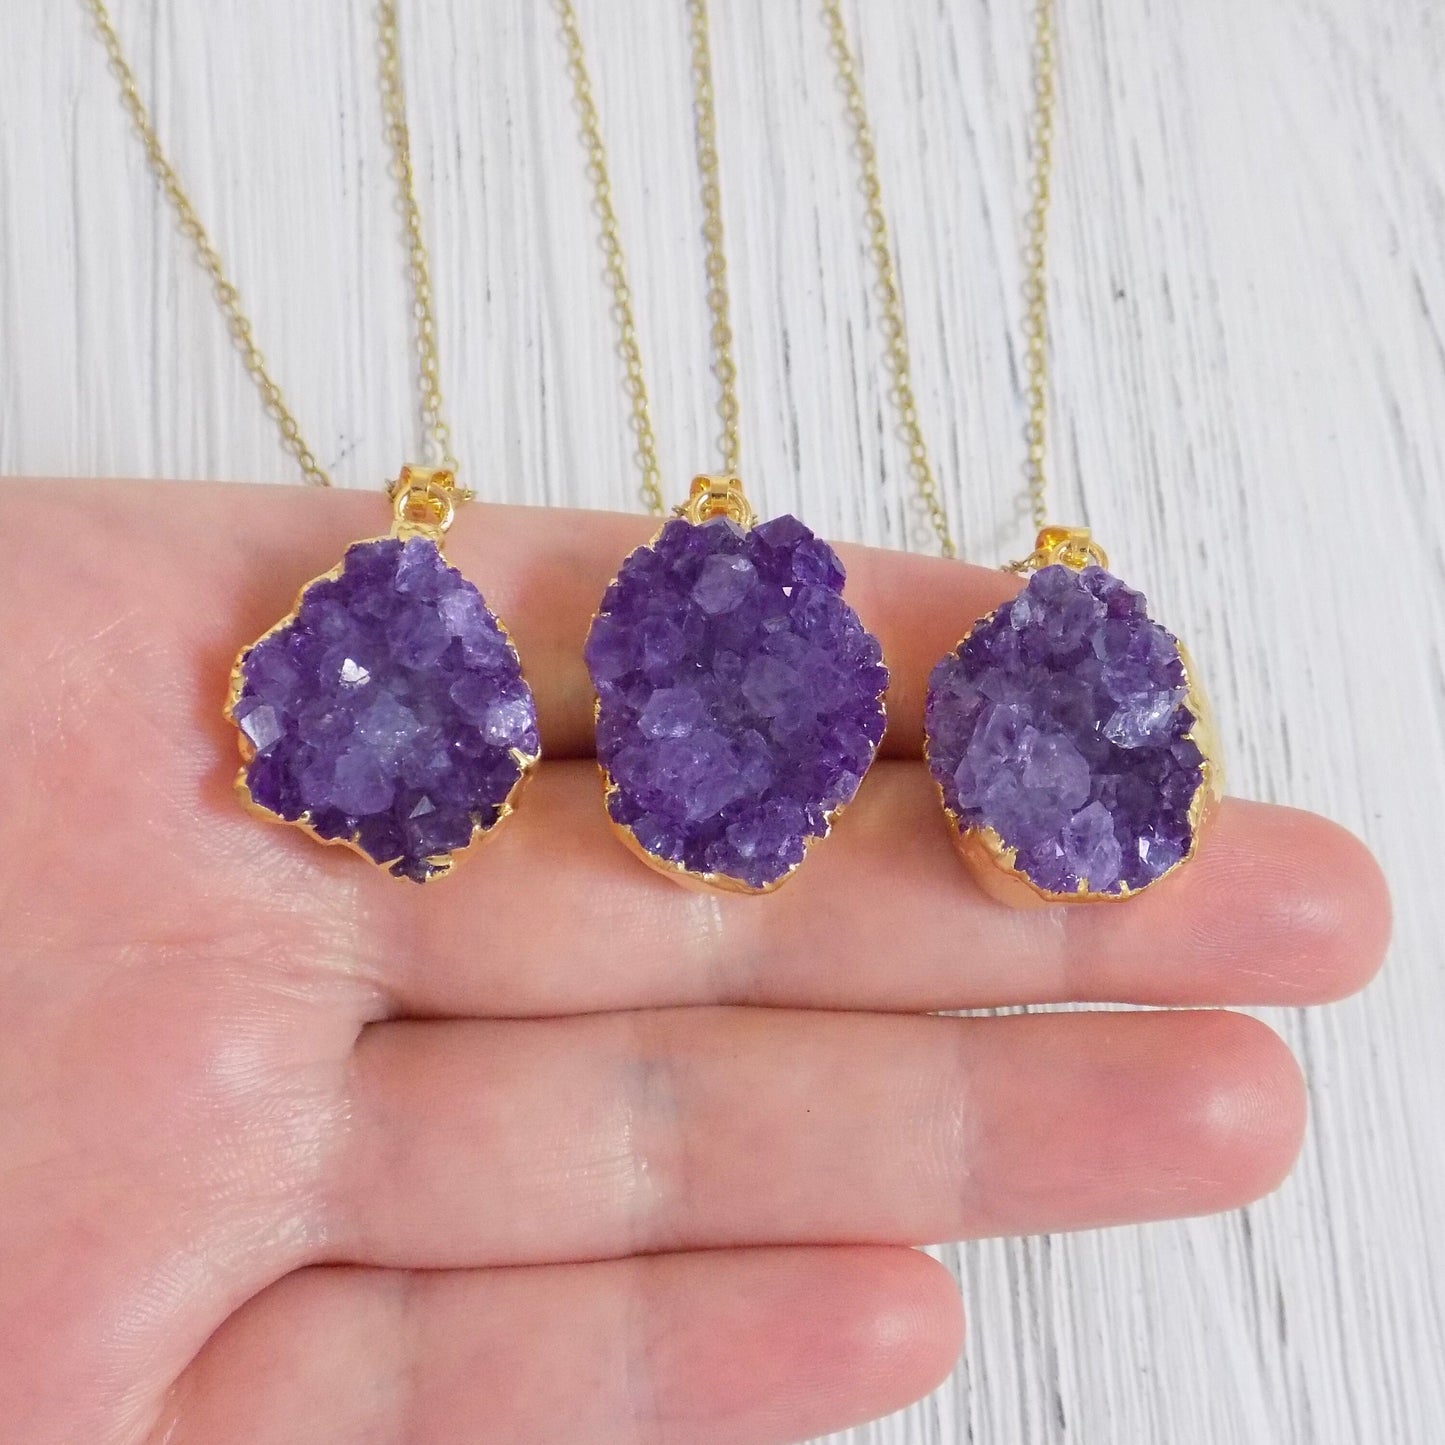 Natural Amethyst Gemstone Necklace Gold, Christmas Gifts For Women, R12-31